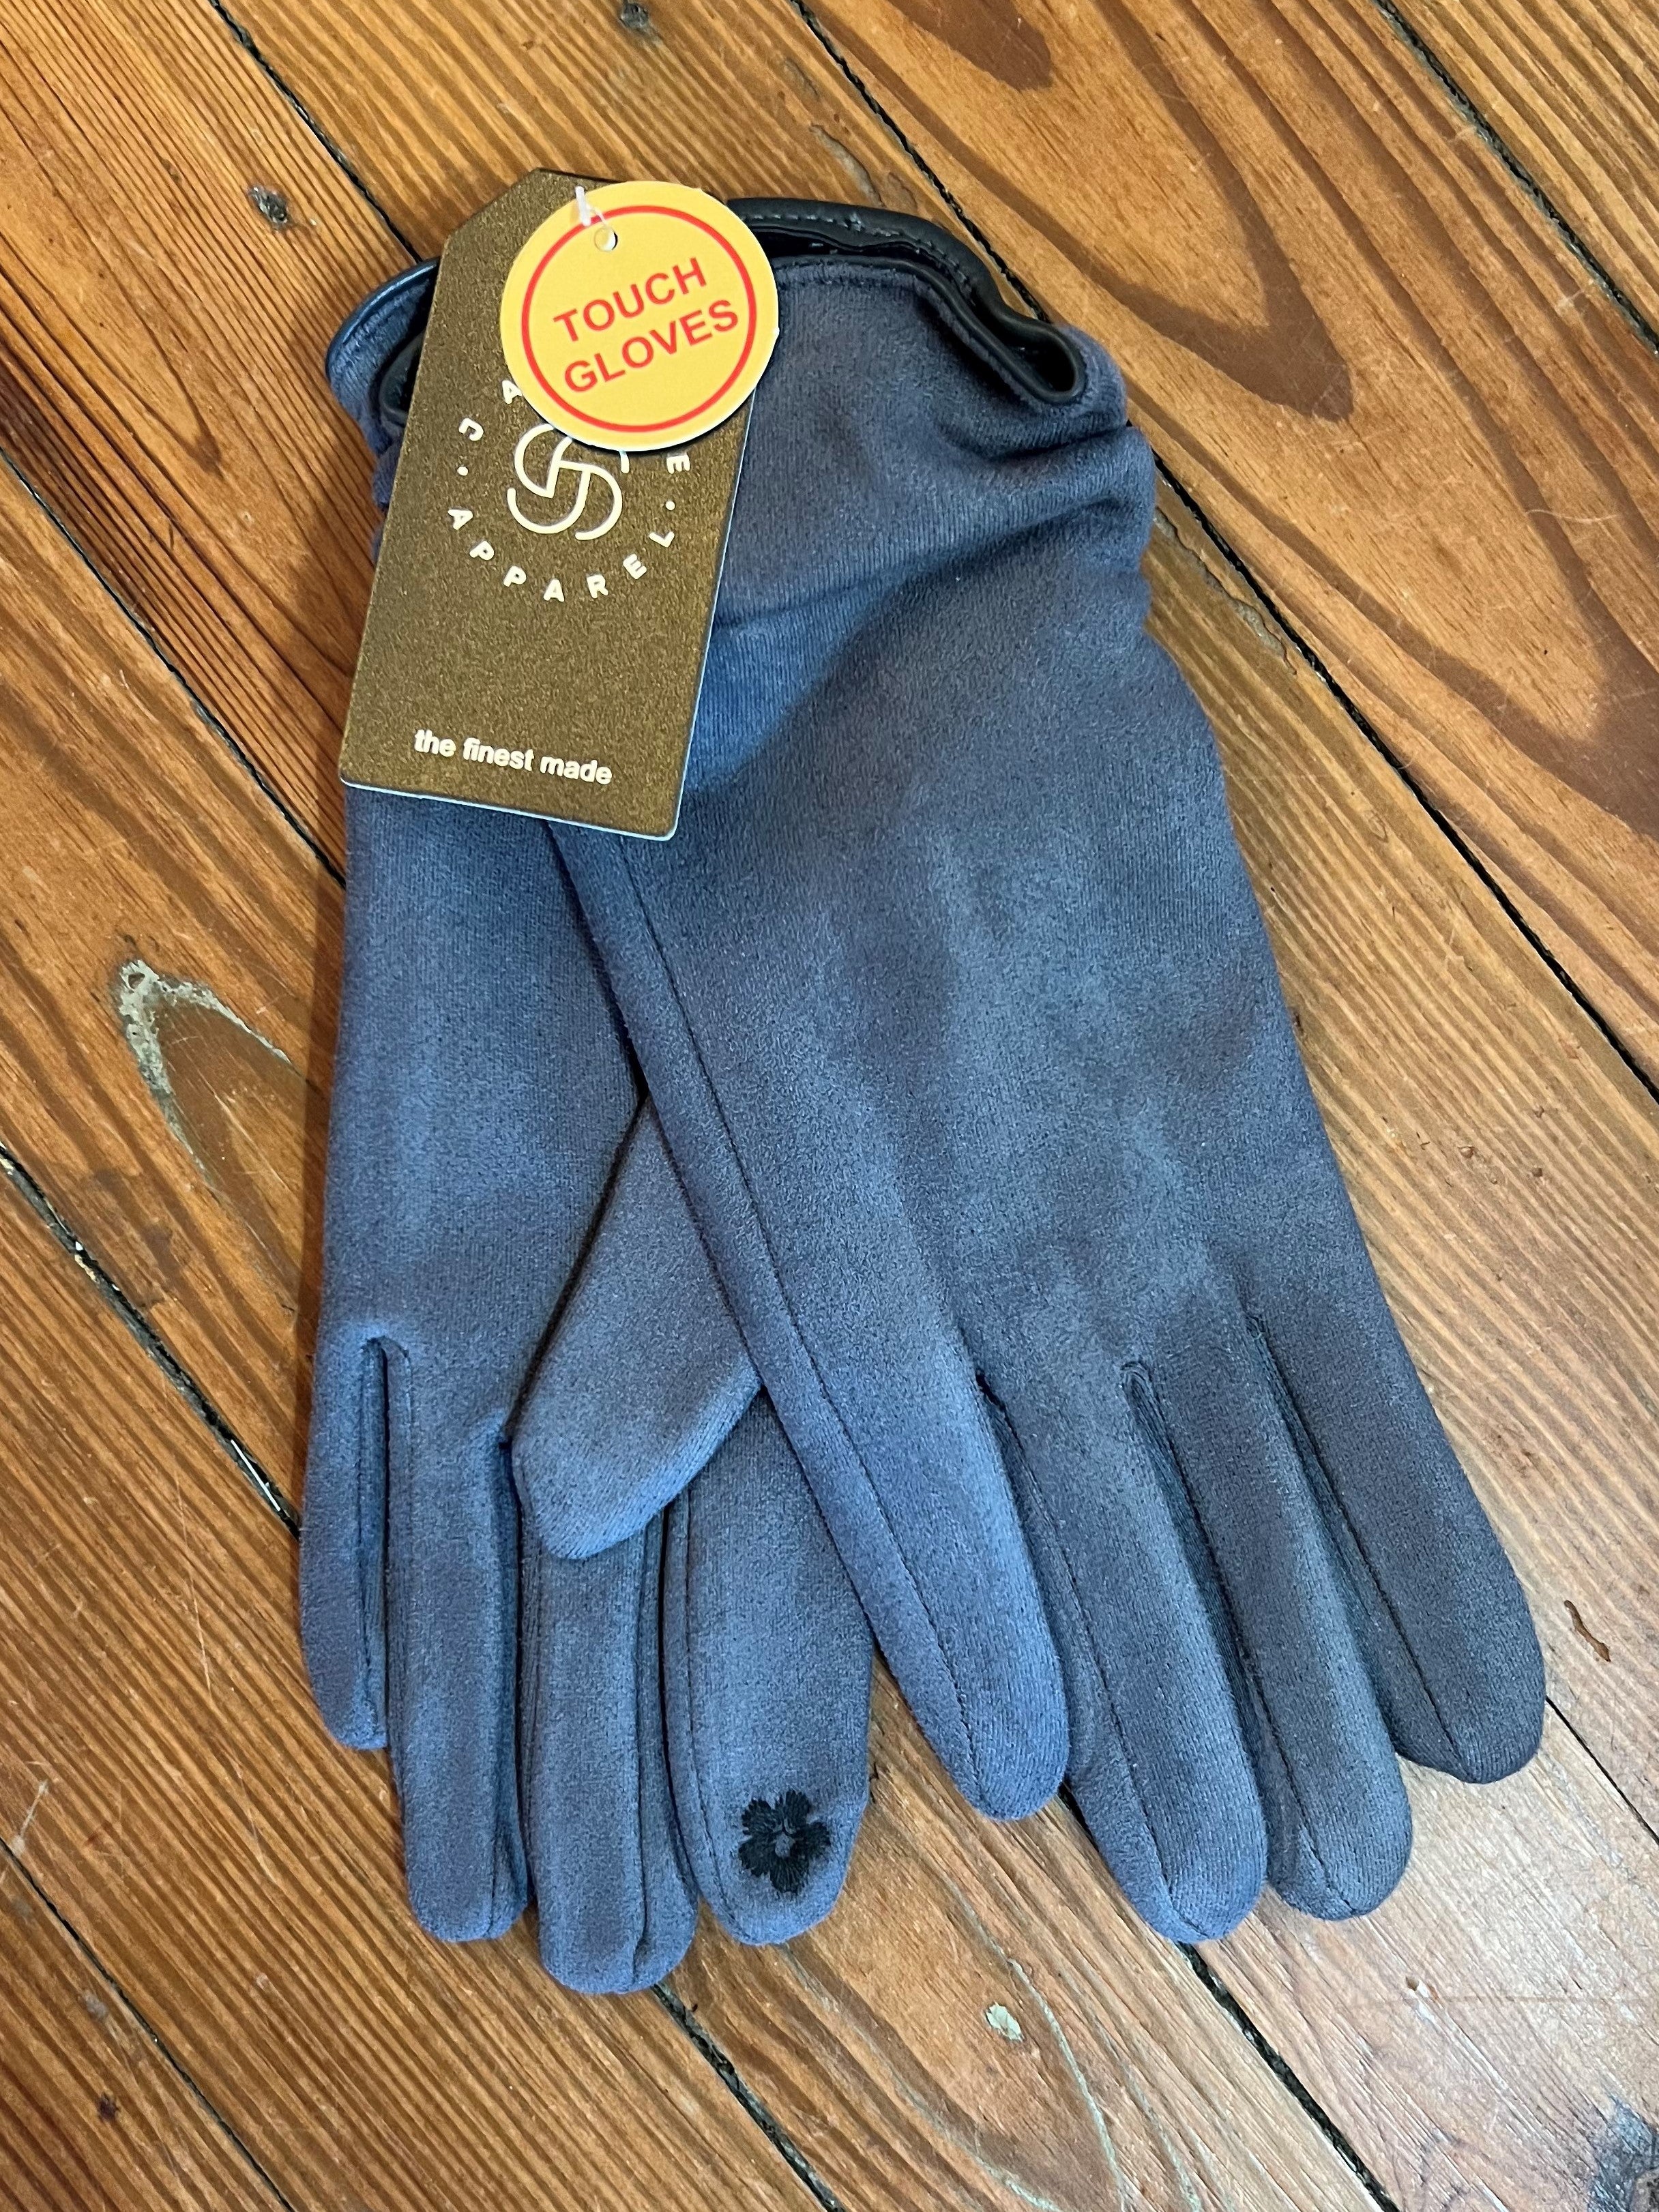 Premium Gloves with Touch Screen Functionality